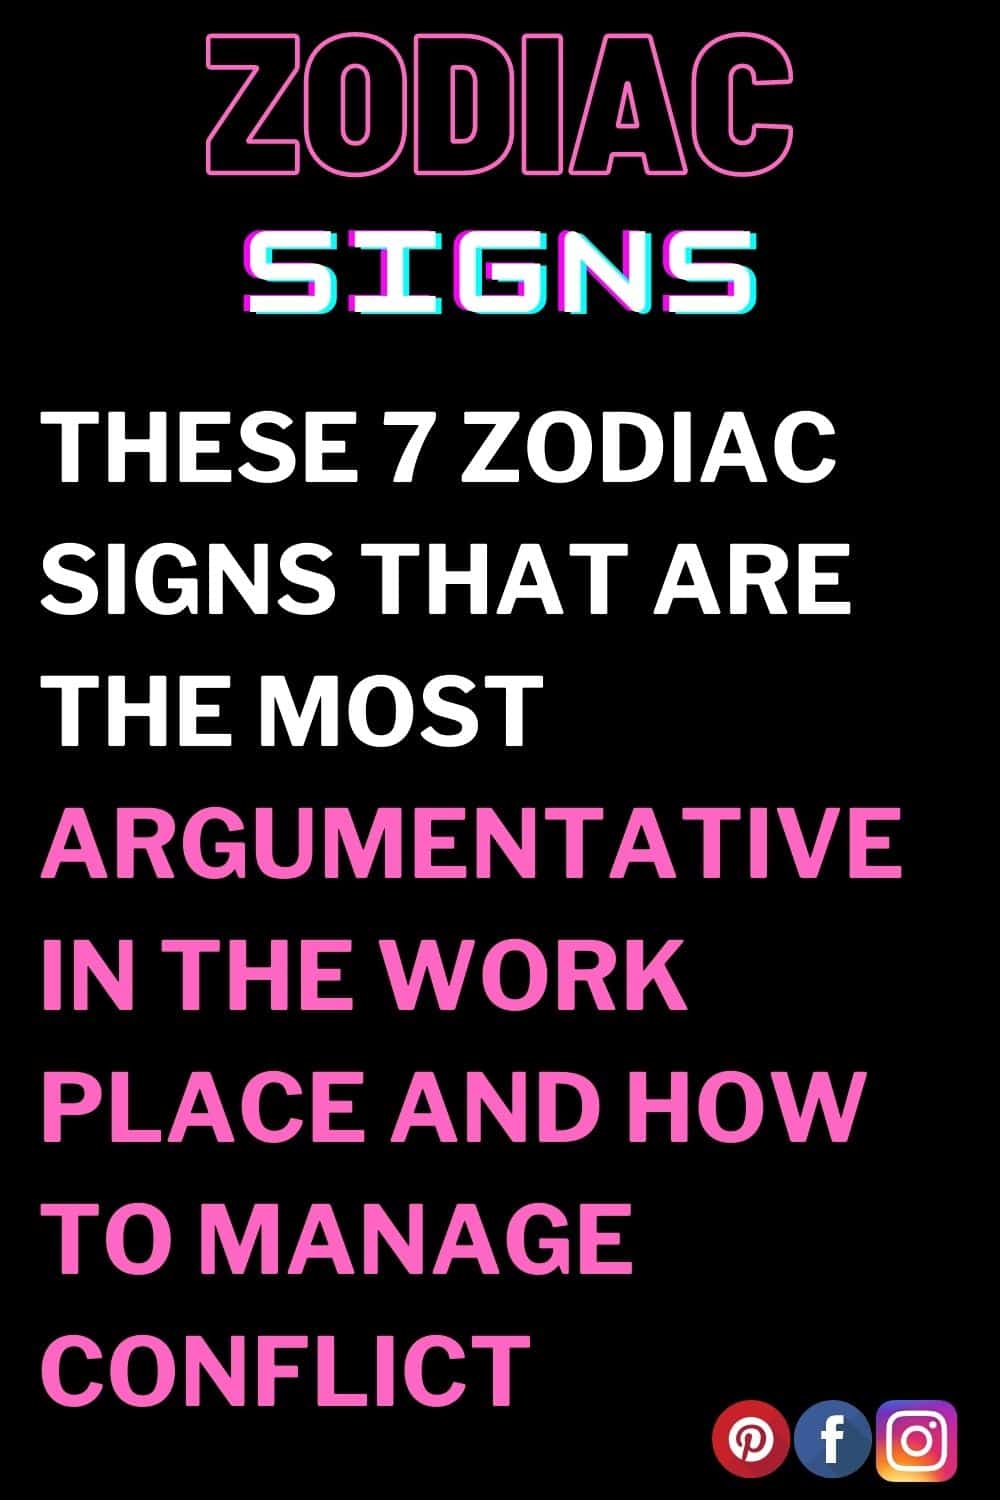 These 7 Zodiac Signs That Are the Most Argumentative in The Work Place and How to Manage Conflict